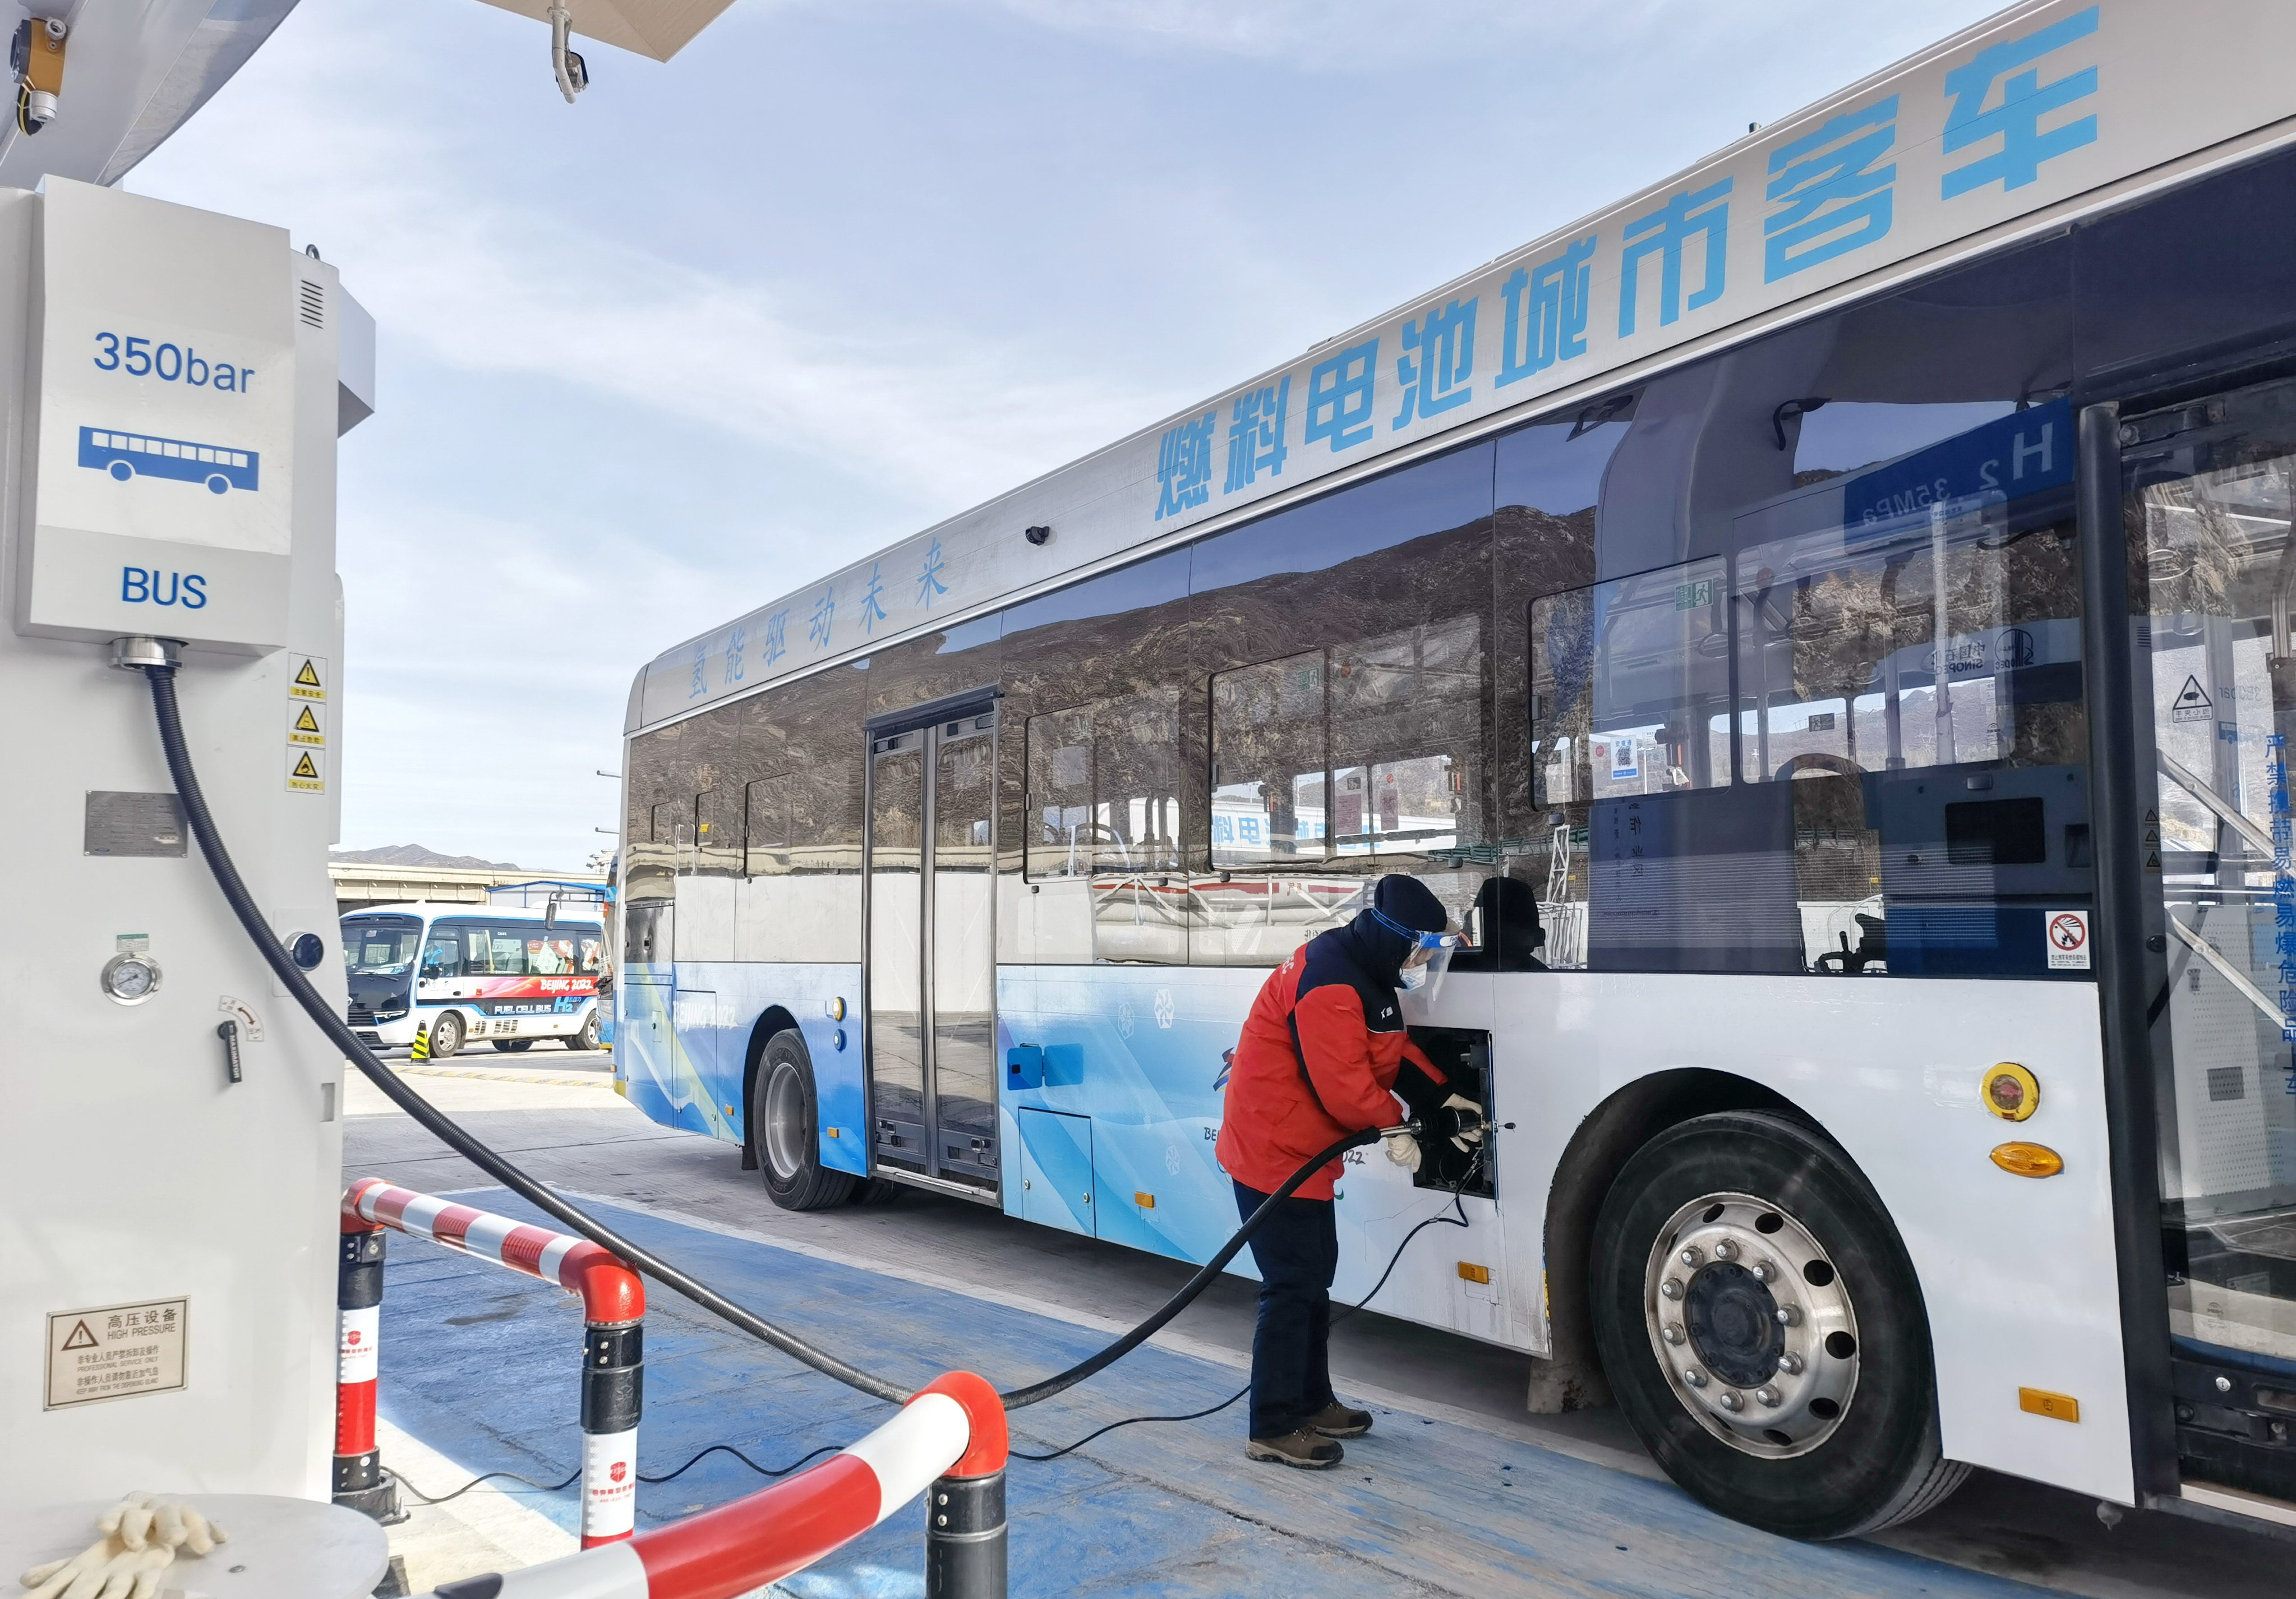 A hydrogen bus used during the Winter Olympics at a Sinopec station in Zhangjiakou in China’s Hebei province on February 11, 2022. Photo: Getty Images